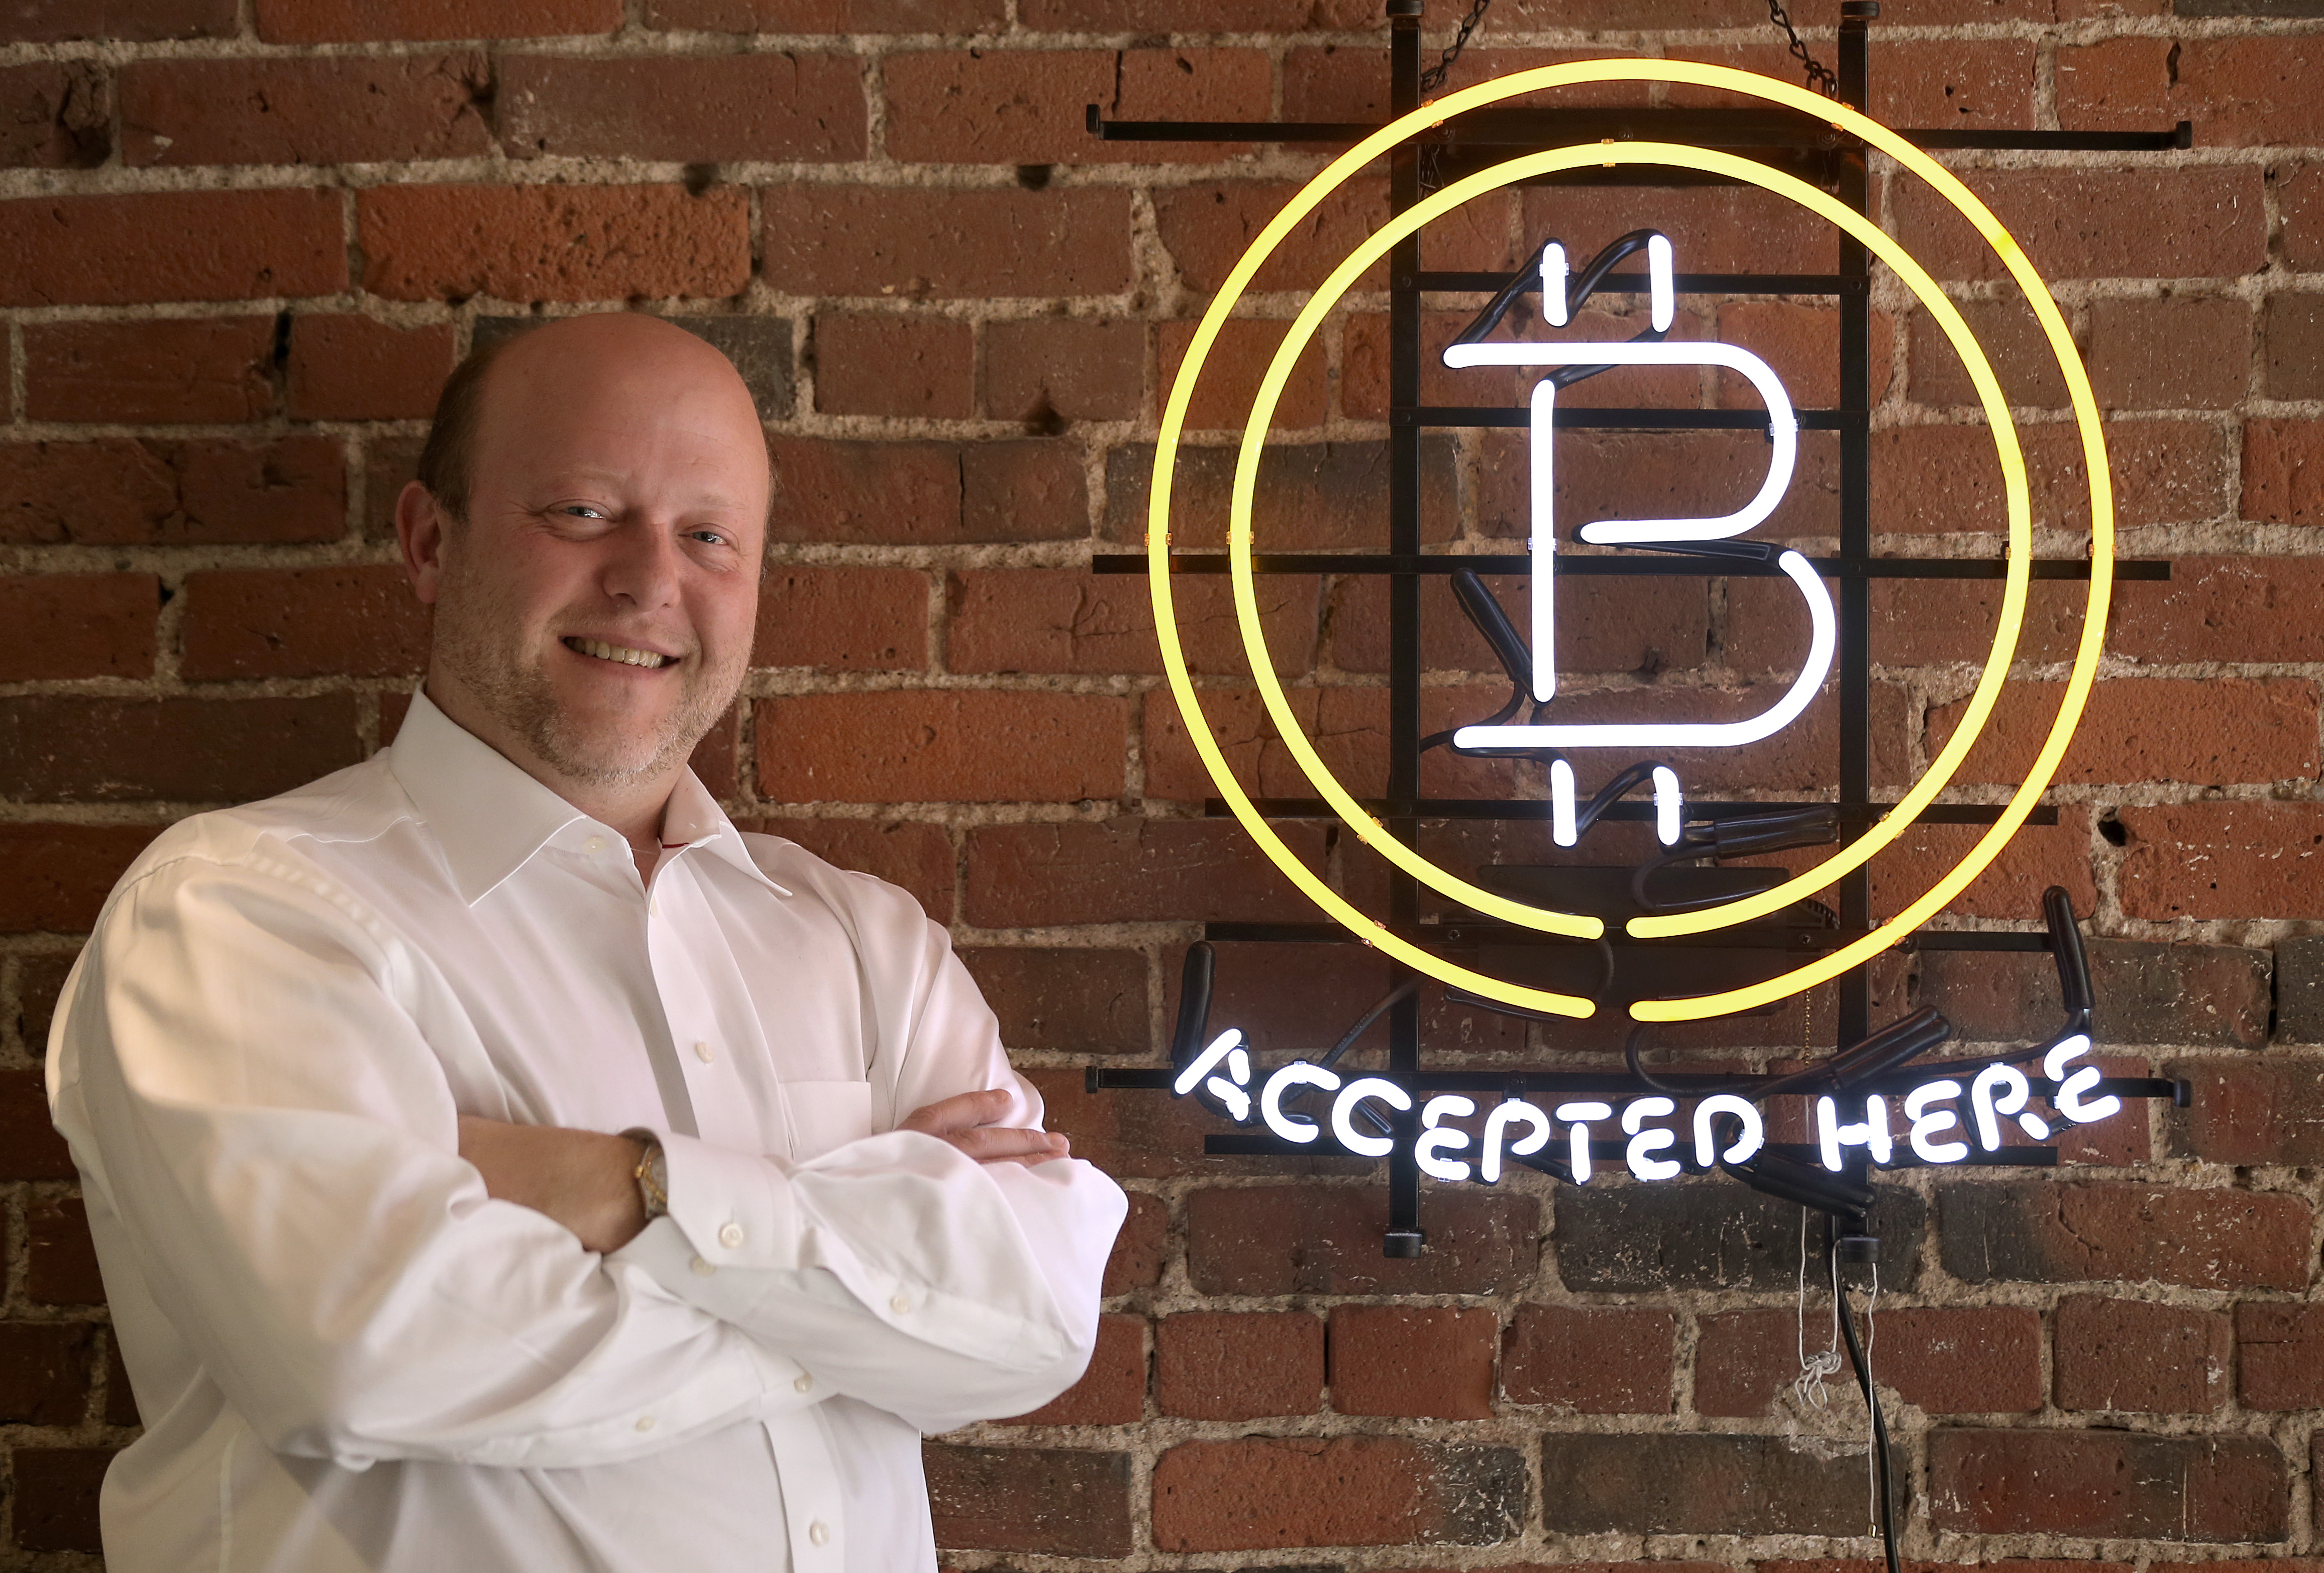 Circle CEO Jeremy Allaire stands next to a neon sign that reads “bitcoin accepted here.”